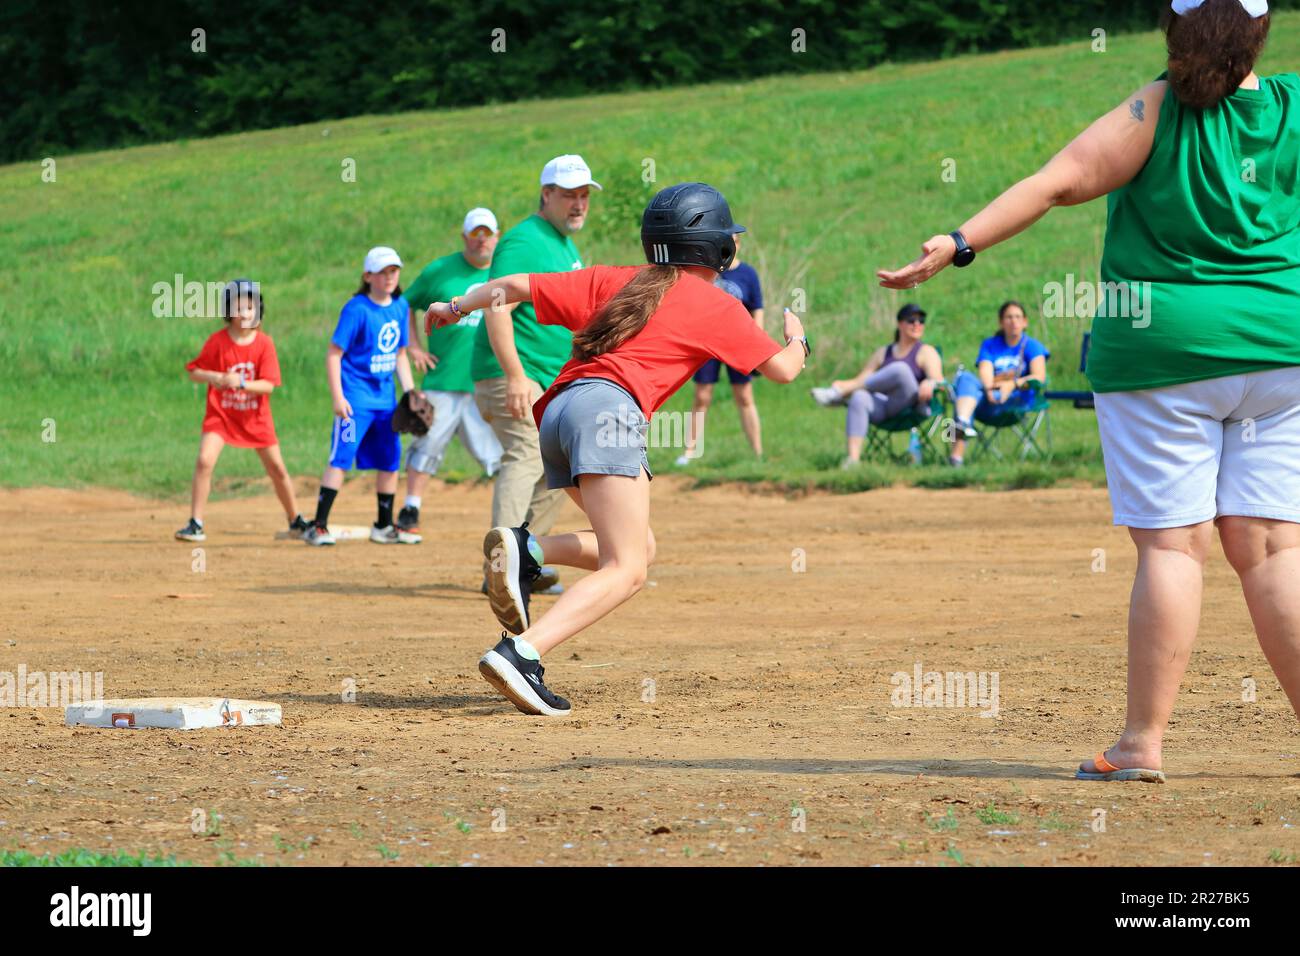 Preteen girls running towards home plate during a softball game Stock Photo